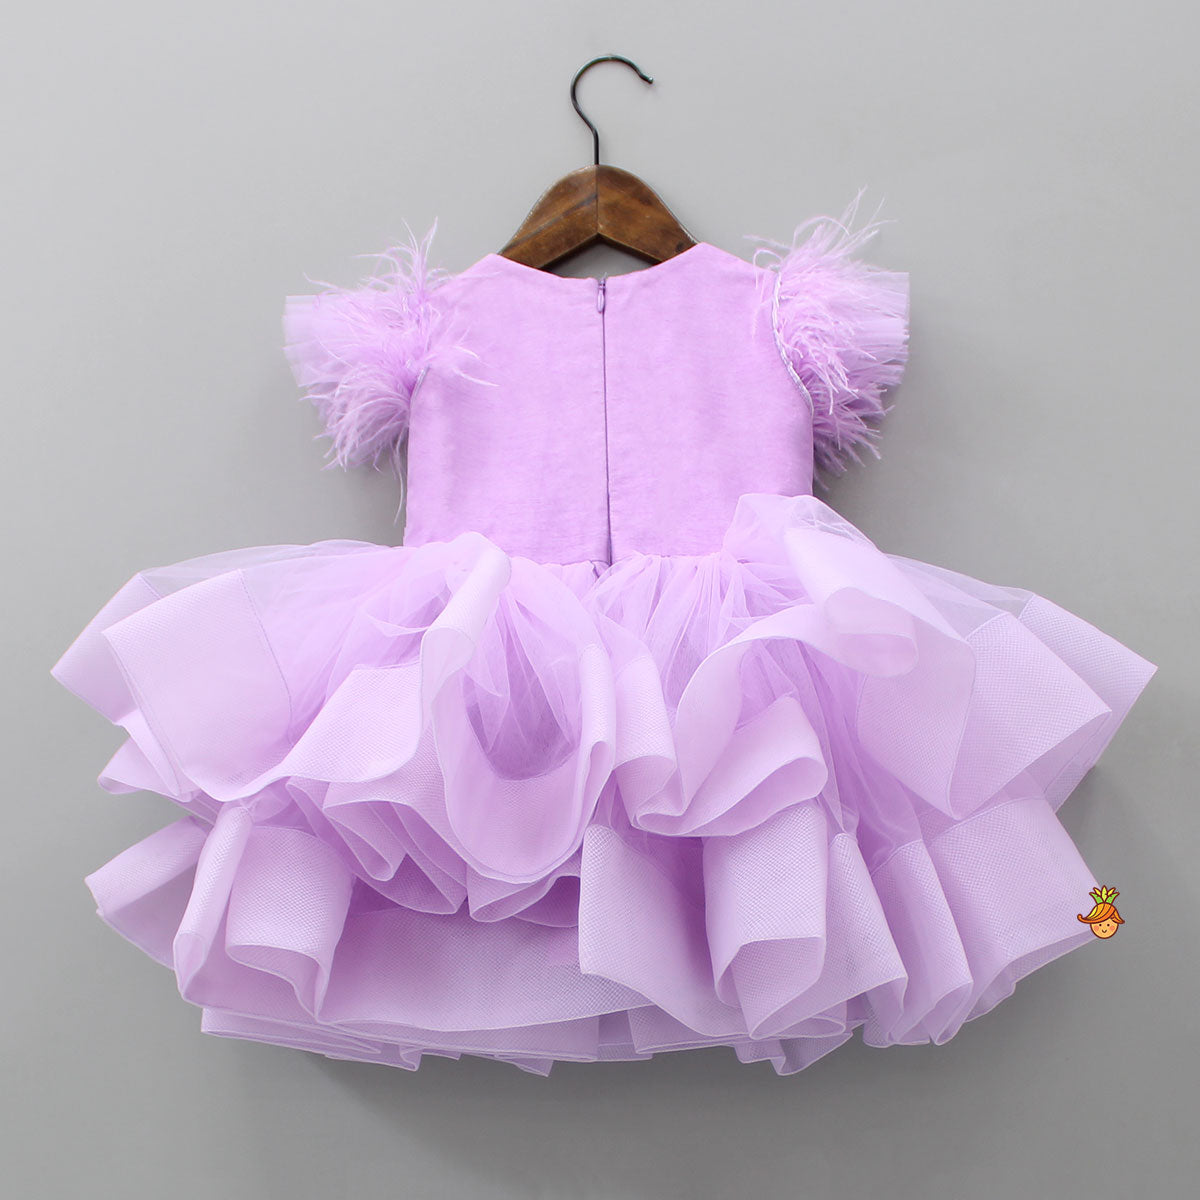 Pre Order: Lovely Butterfly Purple Net Ruffled Dress With Matching Hair Clip